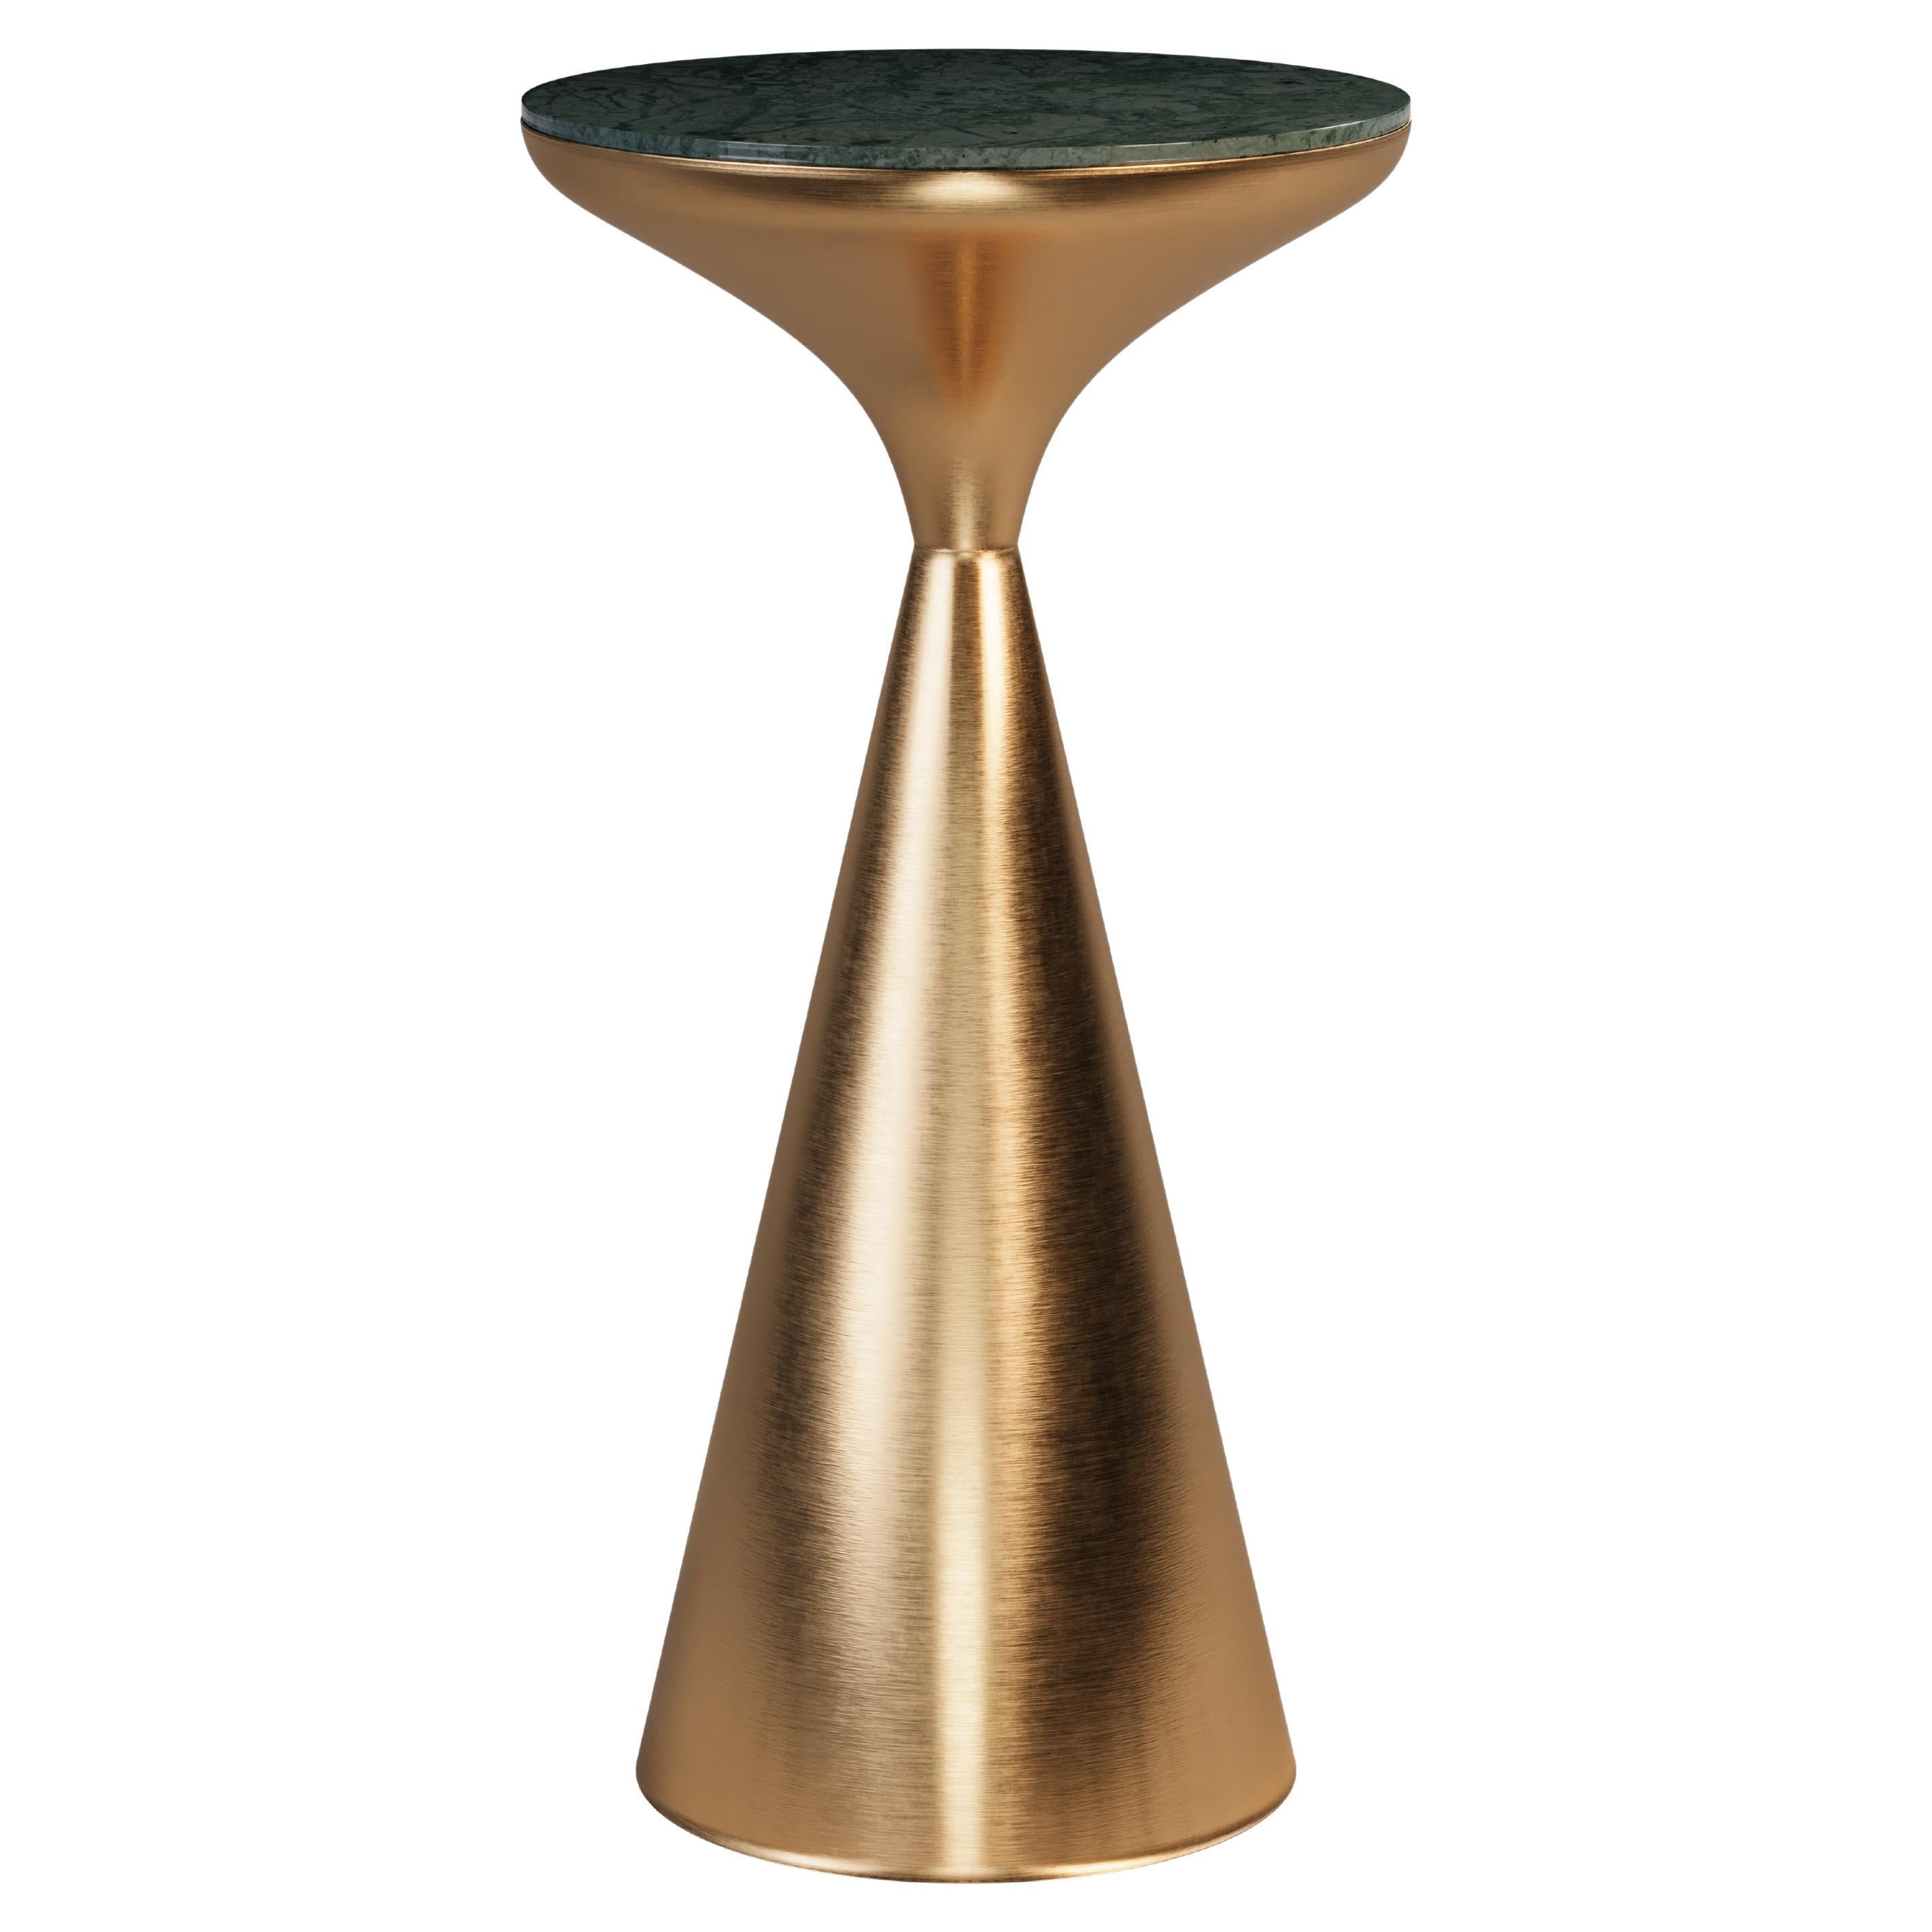 21st Century Lignum Side Table Brushed Brass and Marble by Porus